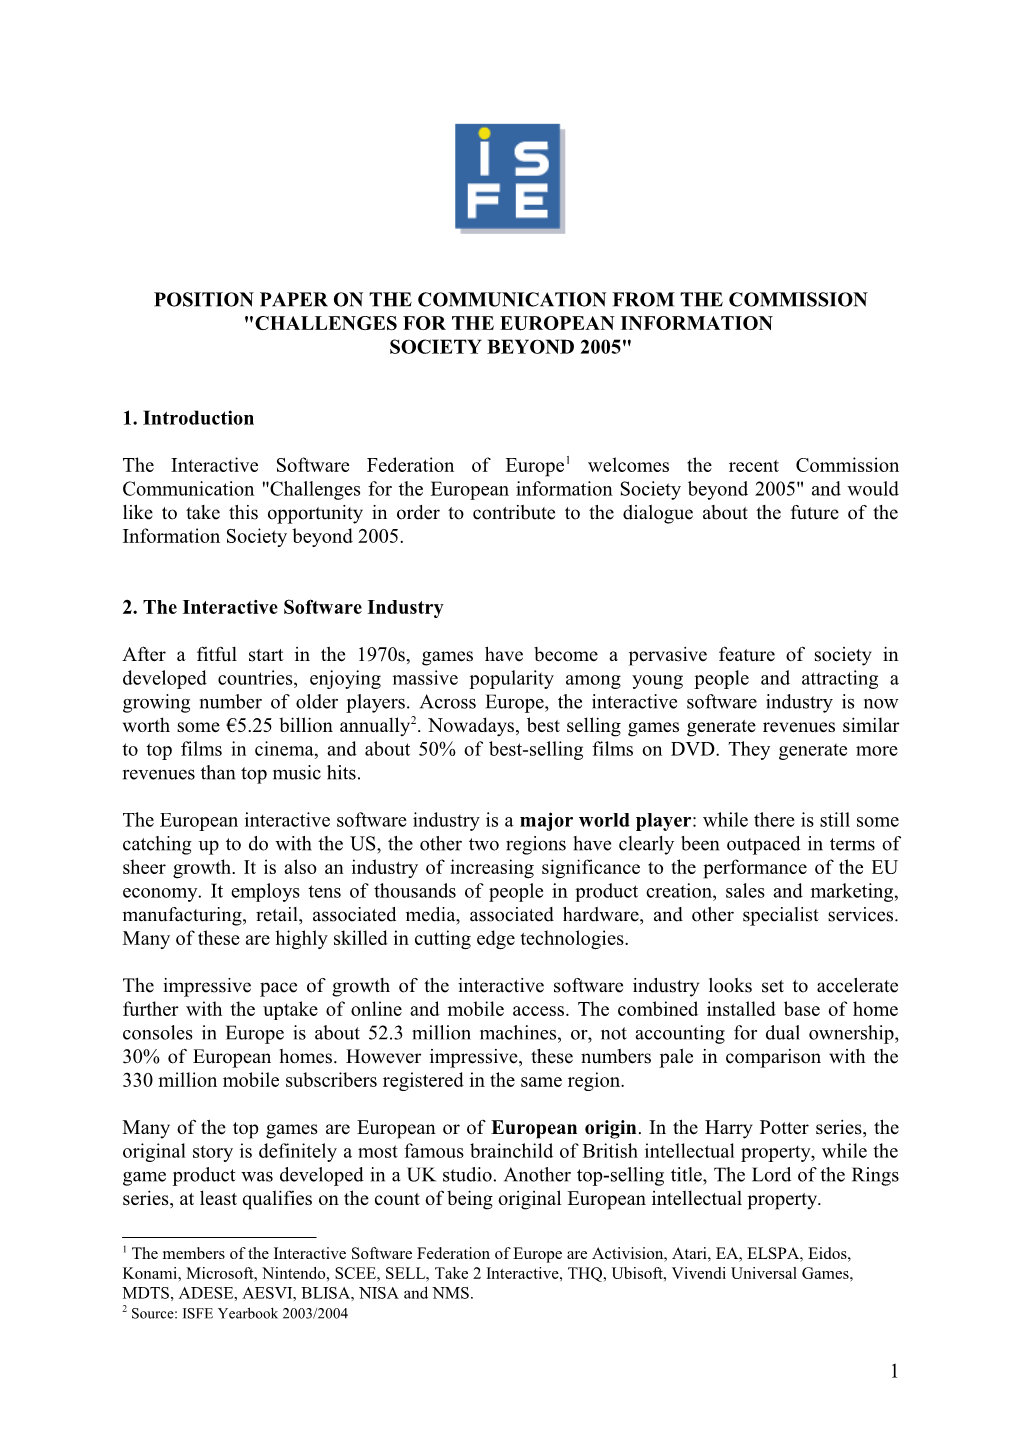 Position Paper on the Communication from the Commission Challenges for the European Information